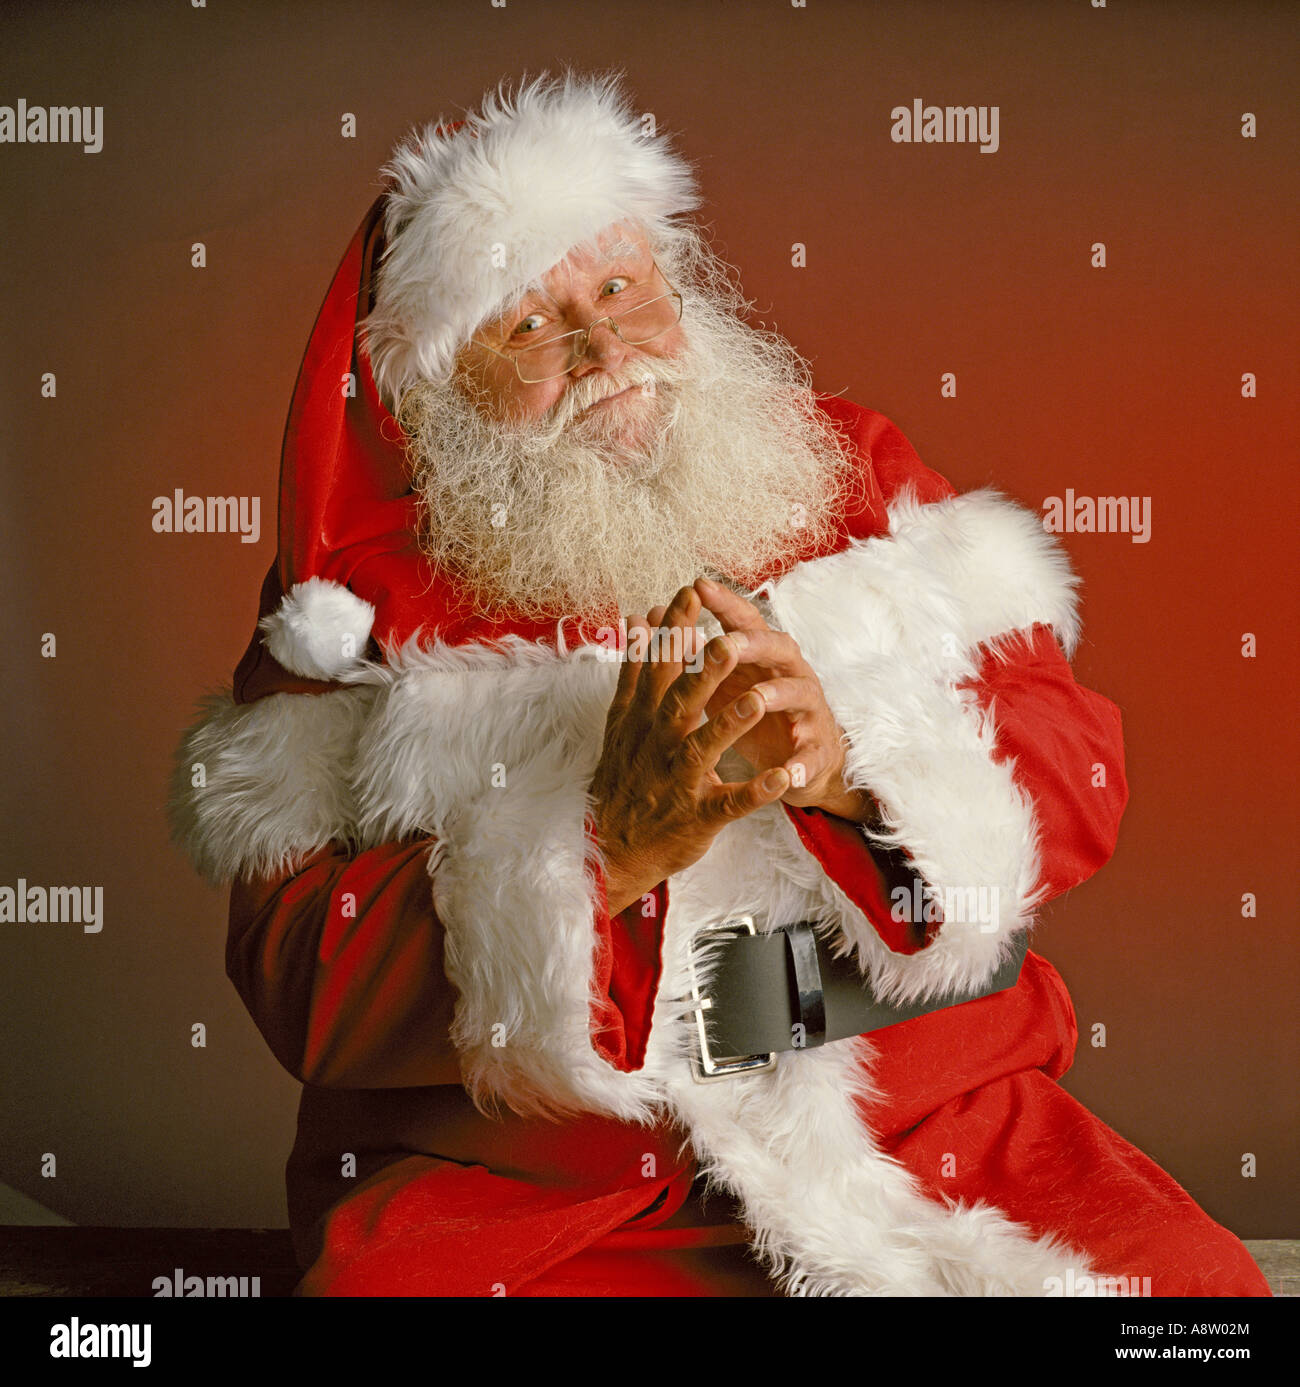 Portrait of man dressed as Santa Claus / Father Christmas. Stock Photo